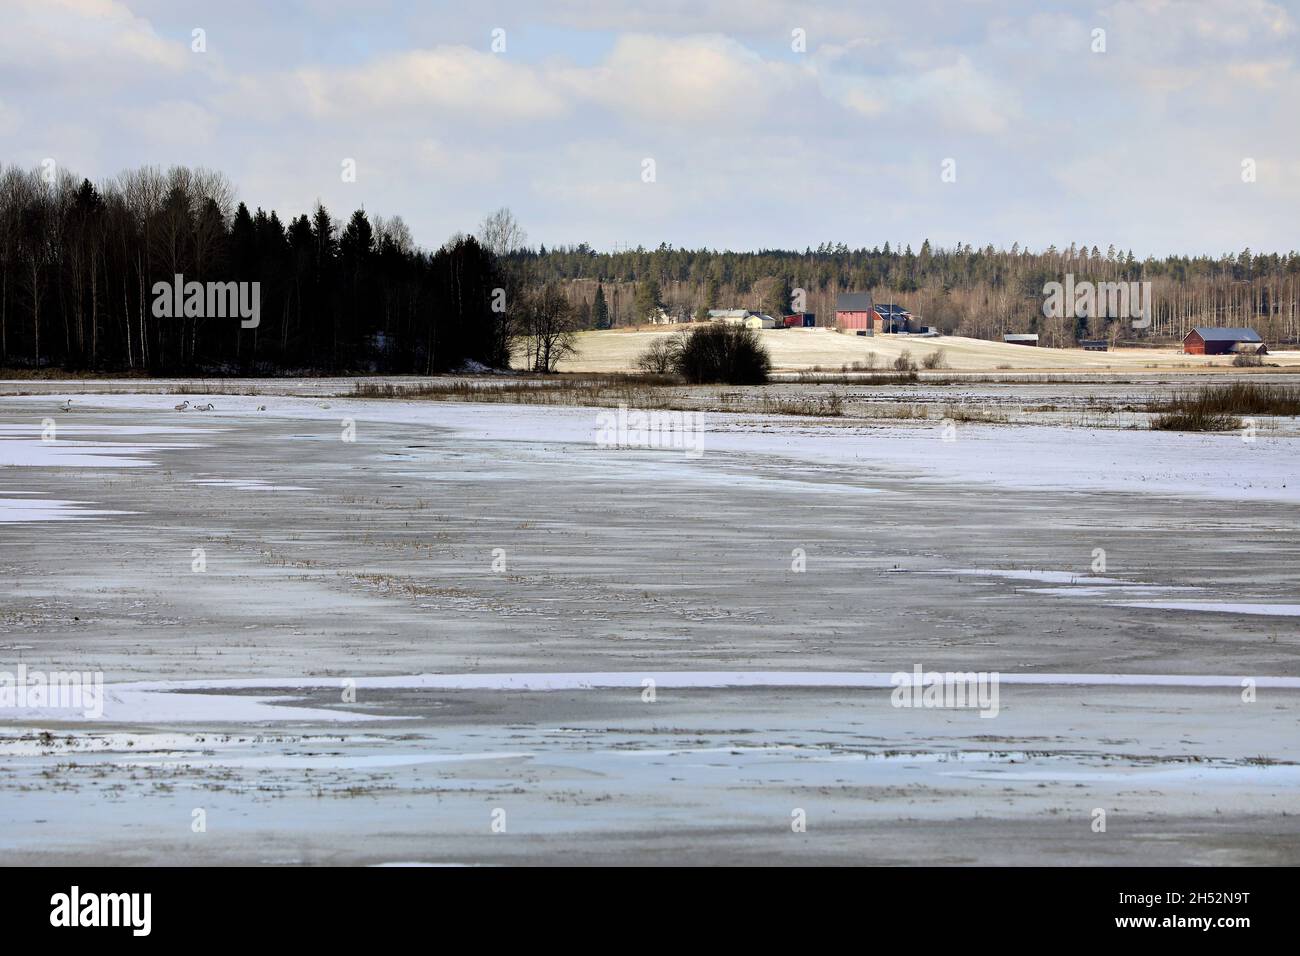 Frozen floodwater over cultivated field in the spring. Frozen water over fields can damage the crops. South of Finland, March 2020. Stock Photo